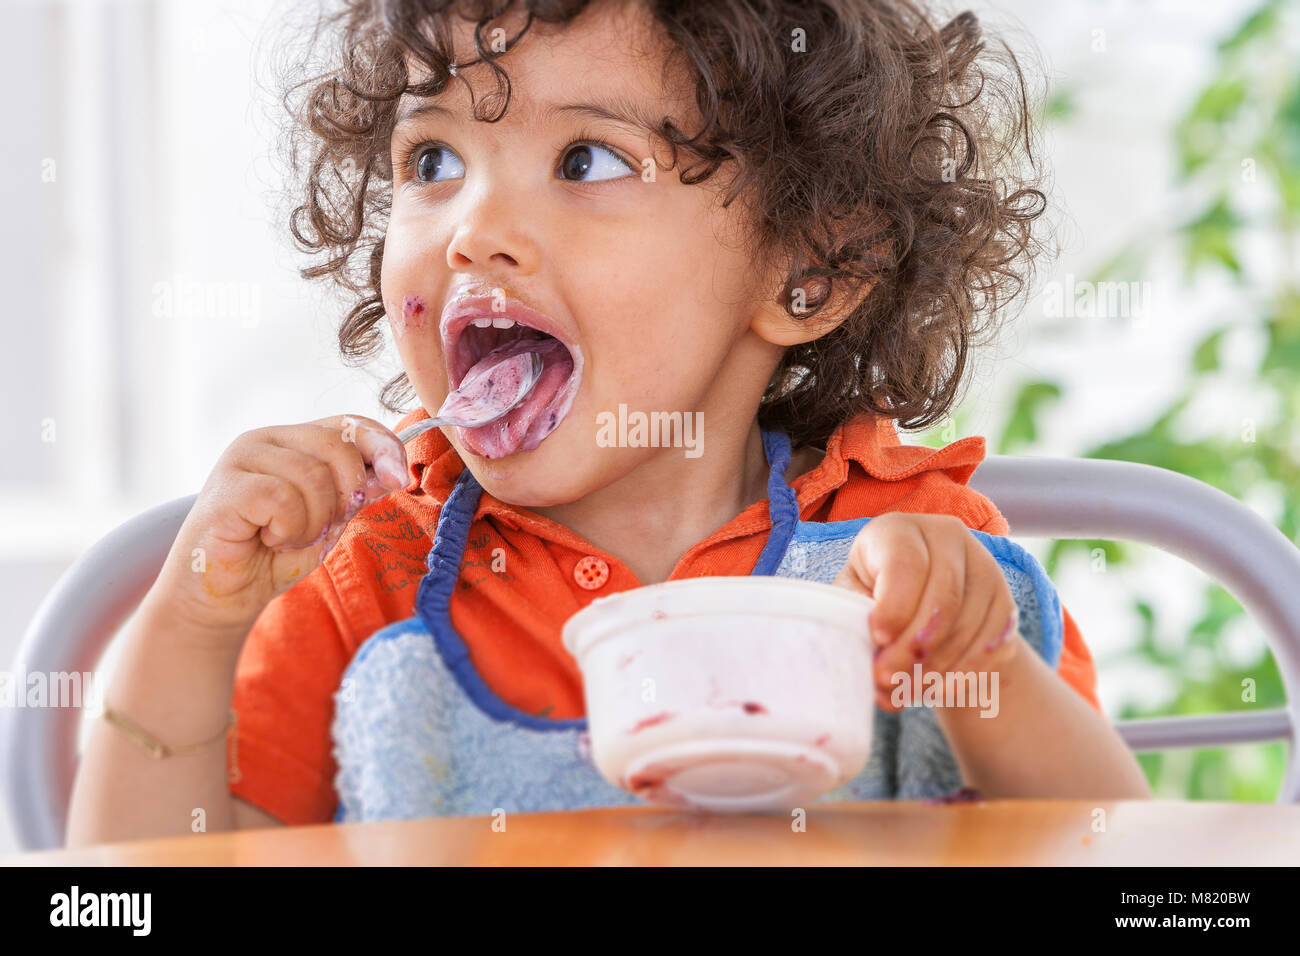 Toddler sitting in highchair and eating greek yogurt. Baby learning to eat and has yogurt on face and hair Stock Photo